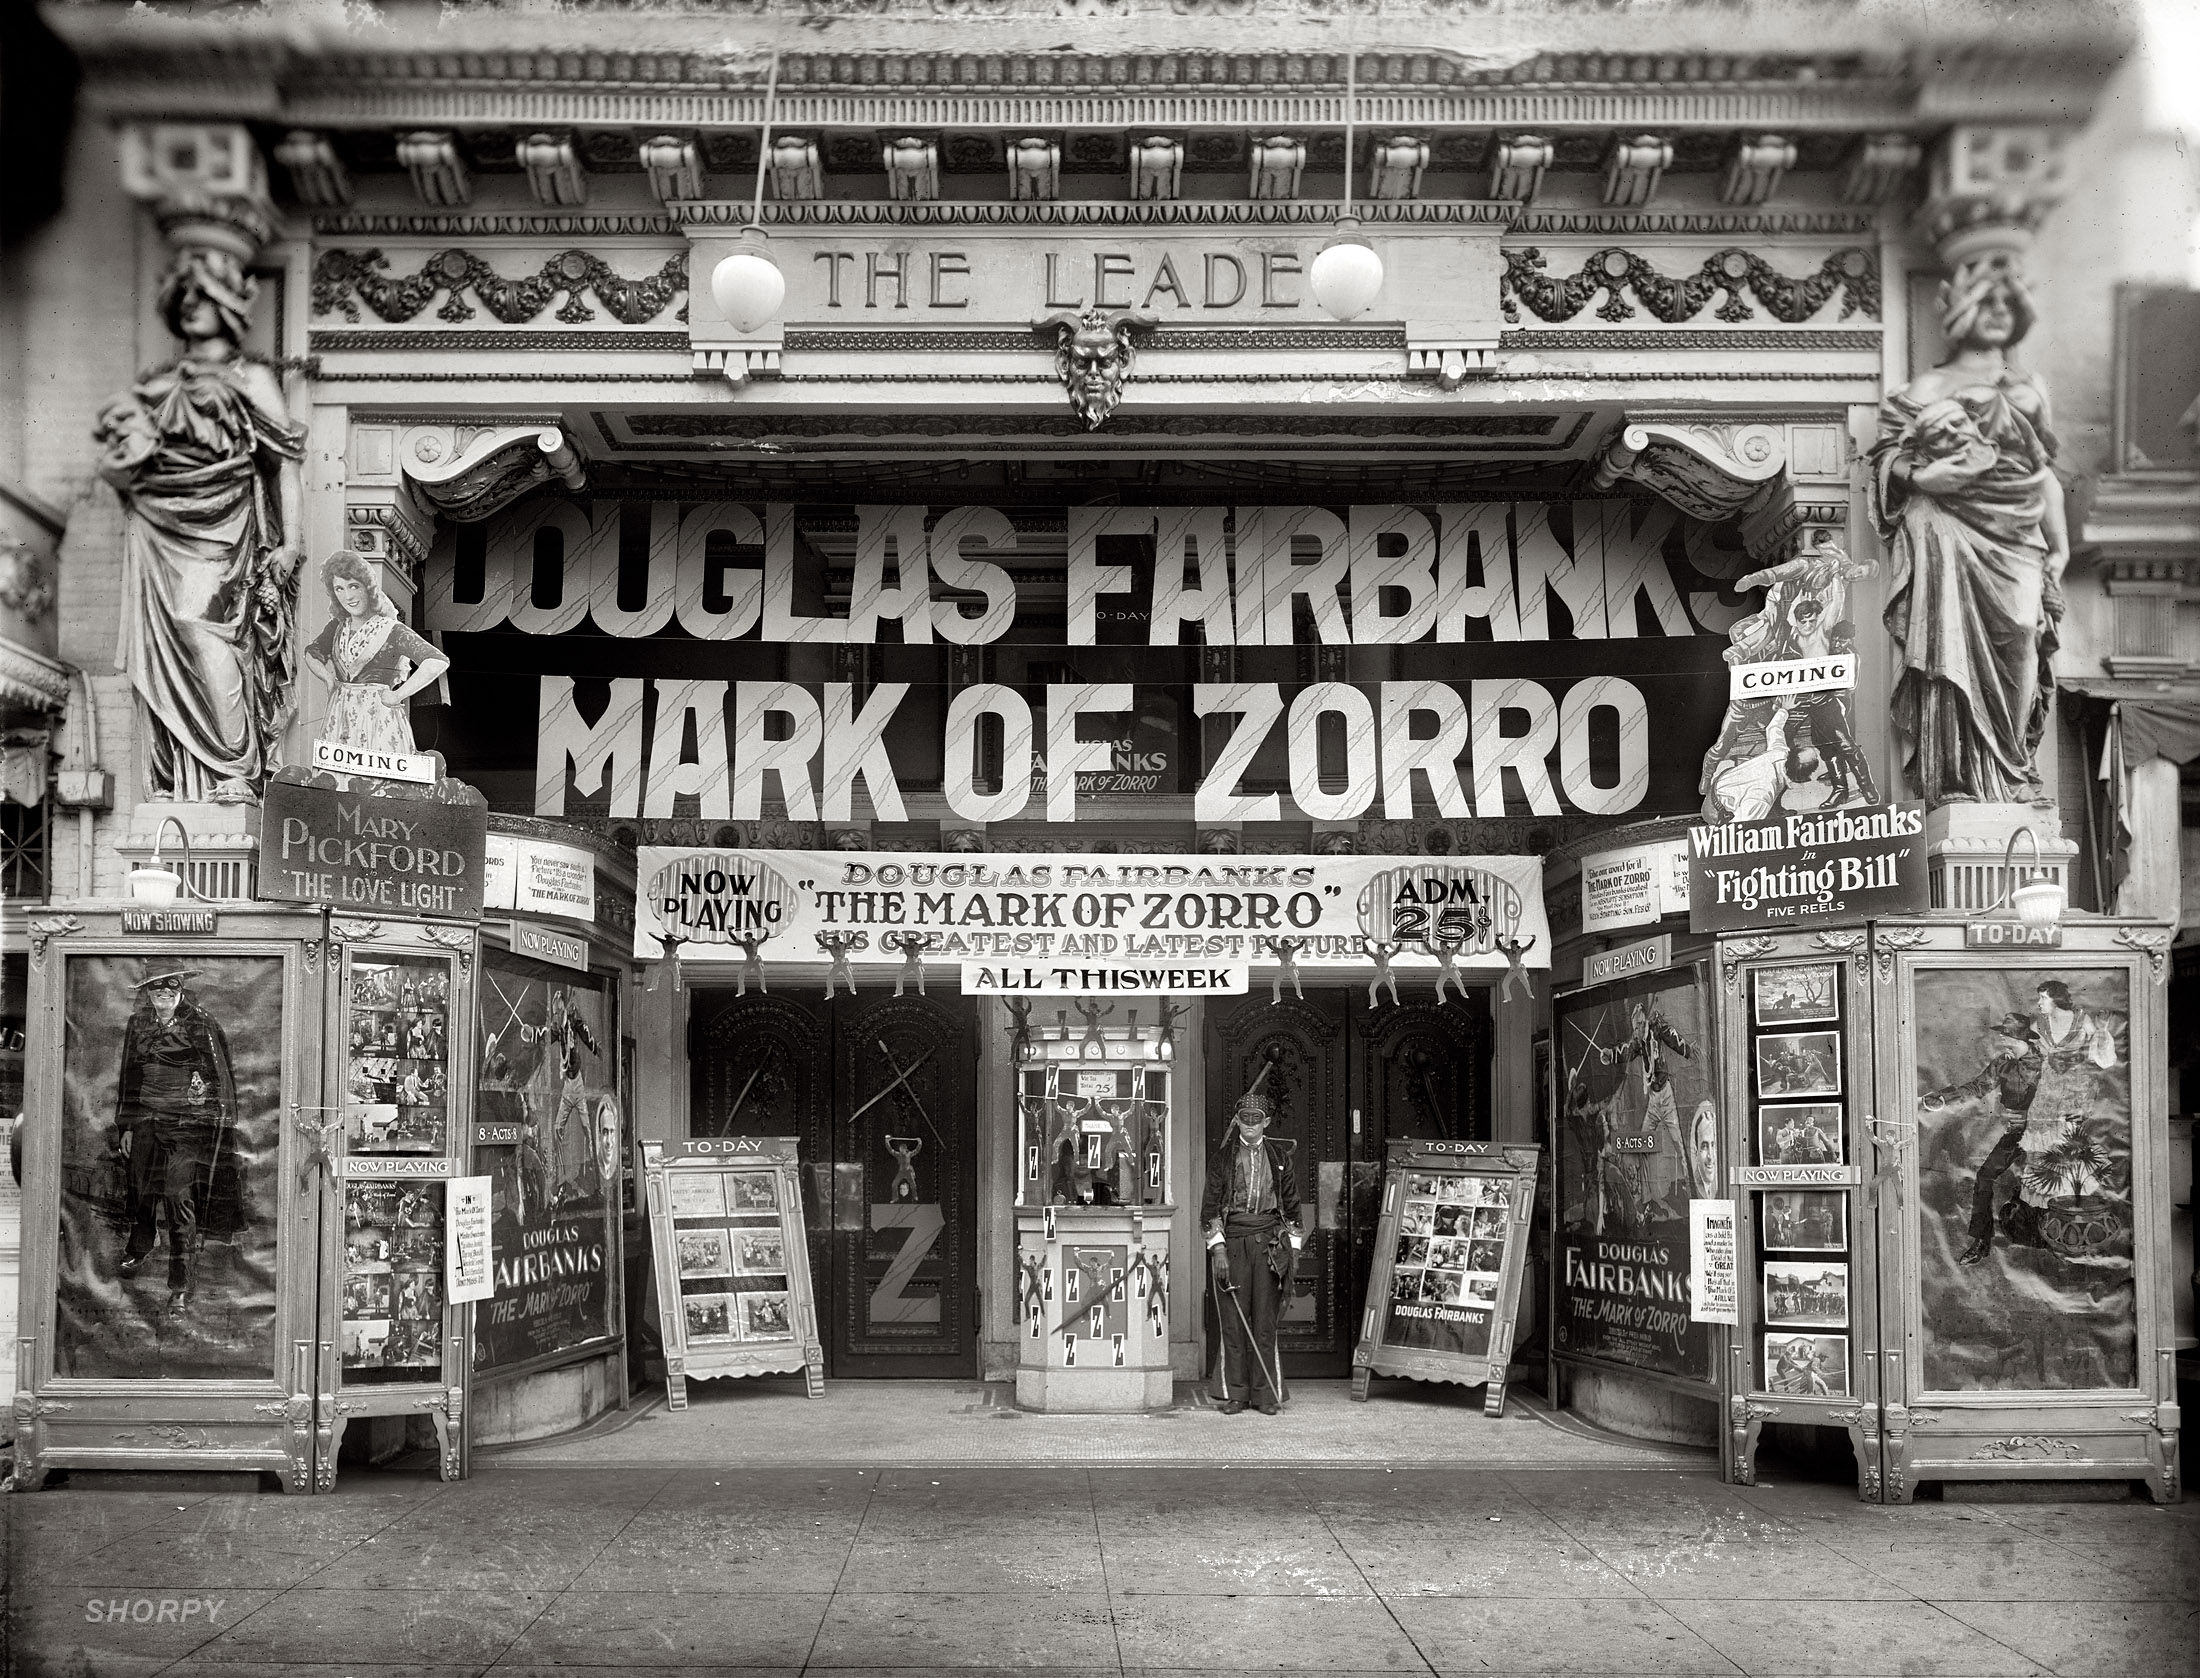 1921. Sidney Lust's Leader Theater in Washington, D.C. Now playing: Douglas Fairbanks in "The Mark of Zorro." National Photo glass negative. View full size.